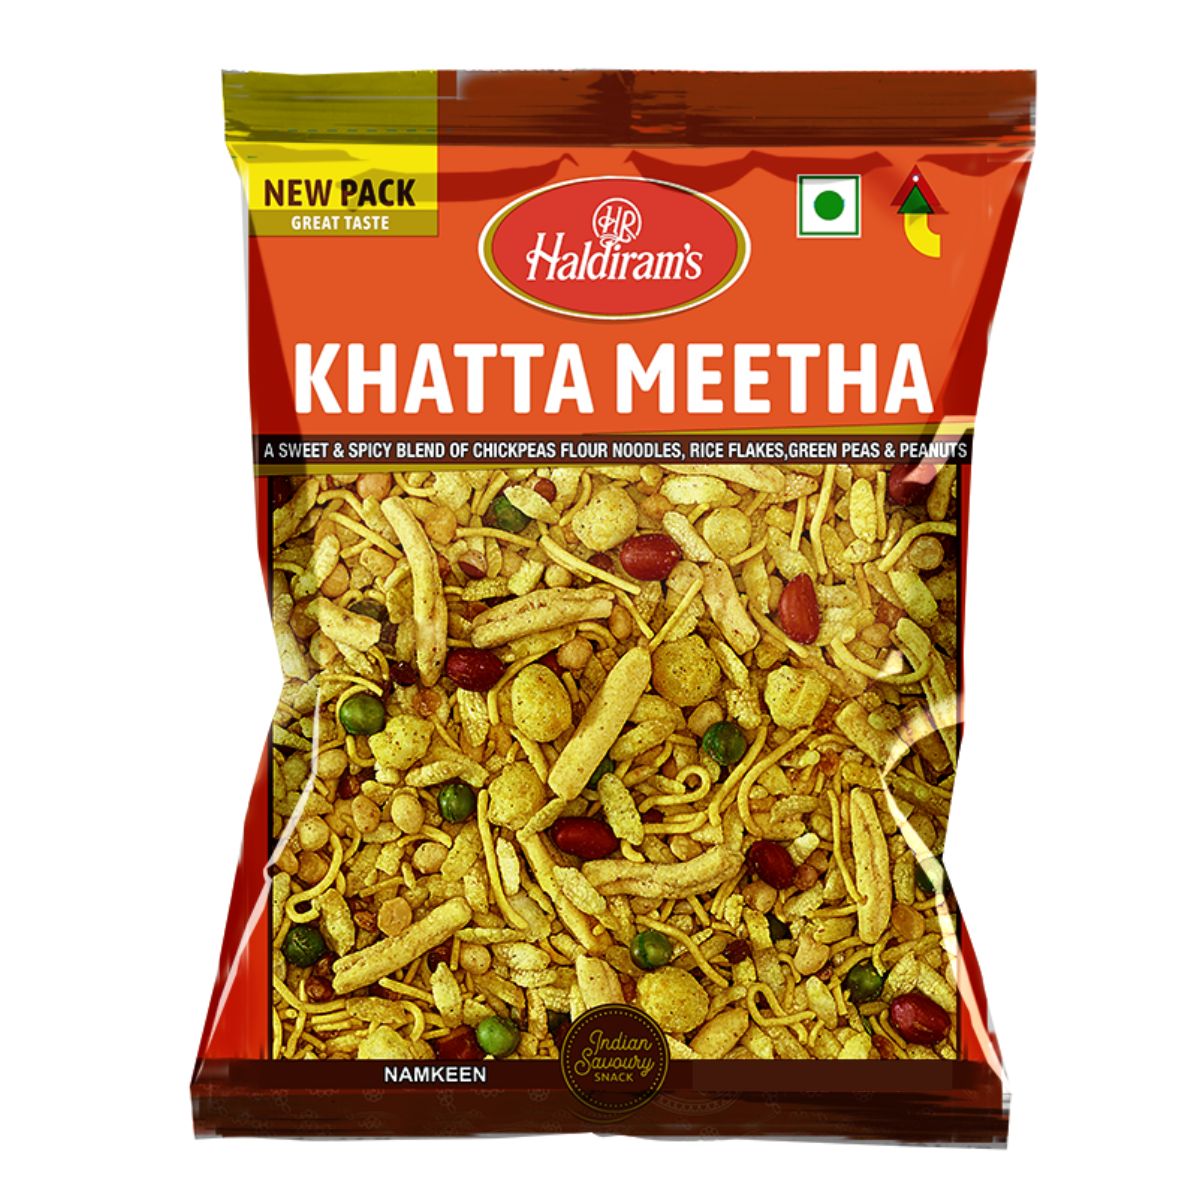 Haldiram's Khatta Meetha - A Sweet And Spicy Blend Of Chickpeas Flour Noodles, Rice Flakes, Green Peas And Peanuts - 400g